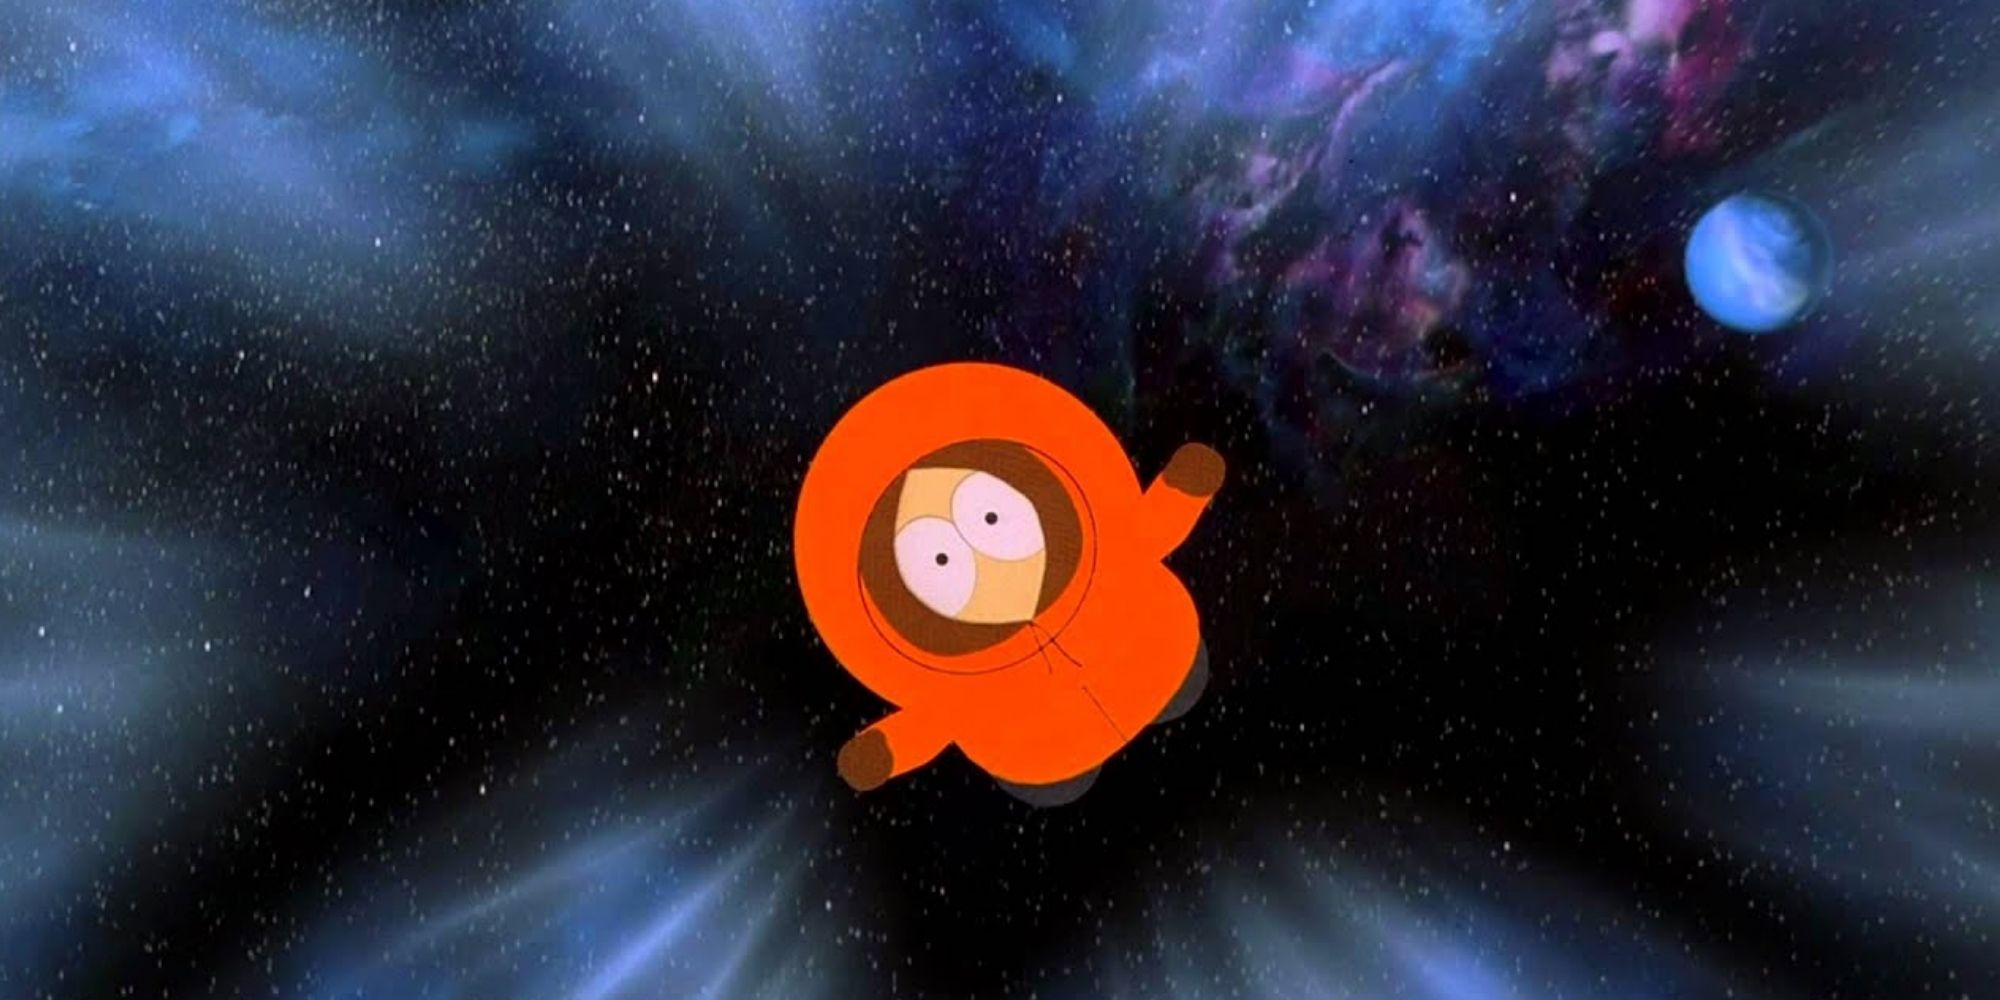 Kenny going to heaven in 'South Park: Bigger, Longer & Uncut'